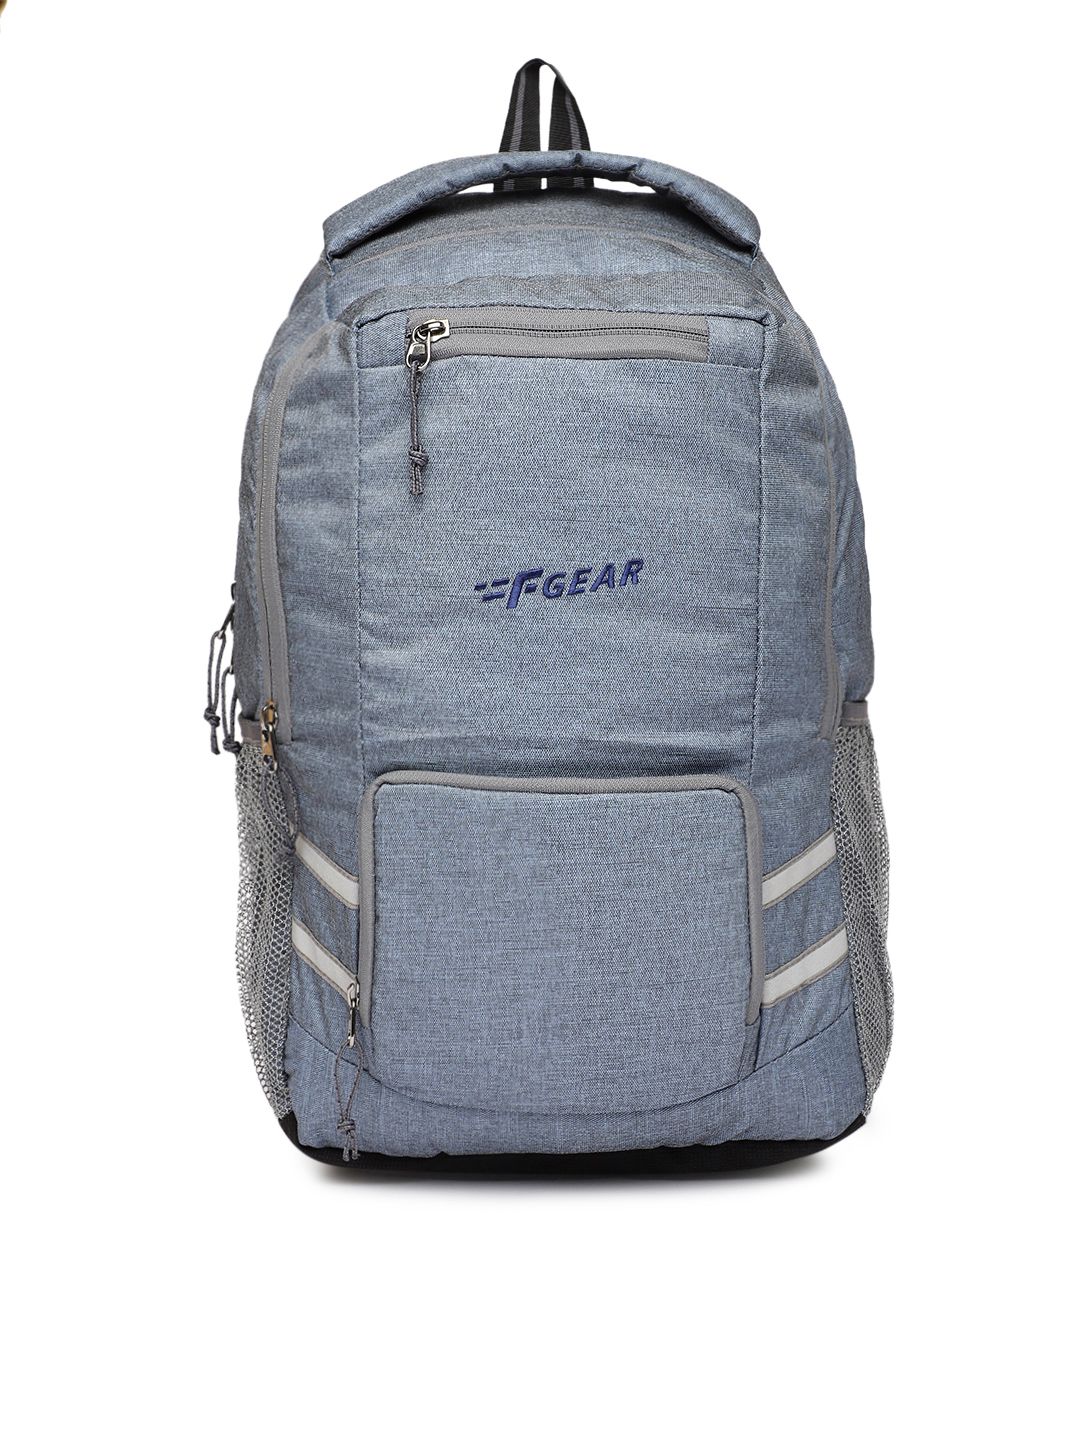 F Gear Unisex Intellect Blue Melange Solid Backpack Price in India